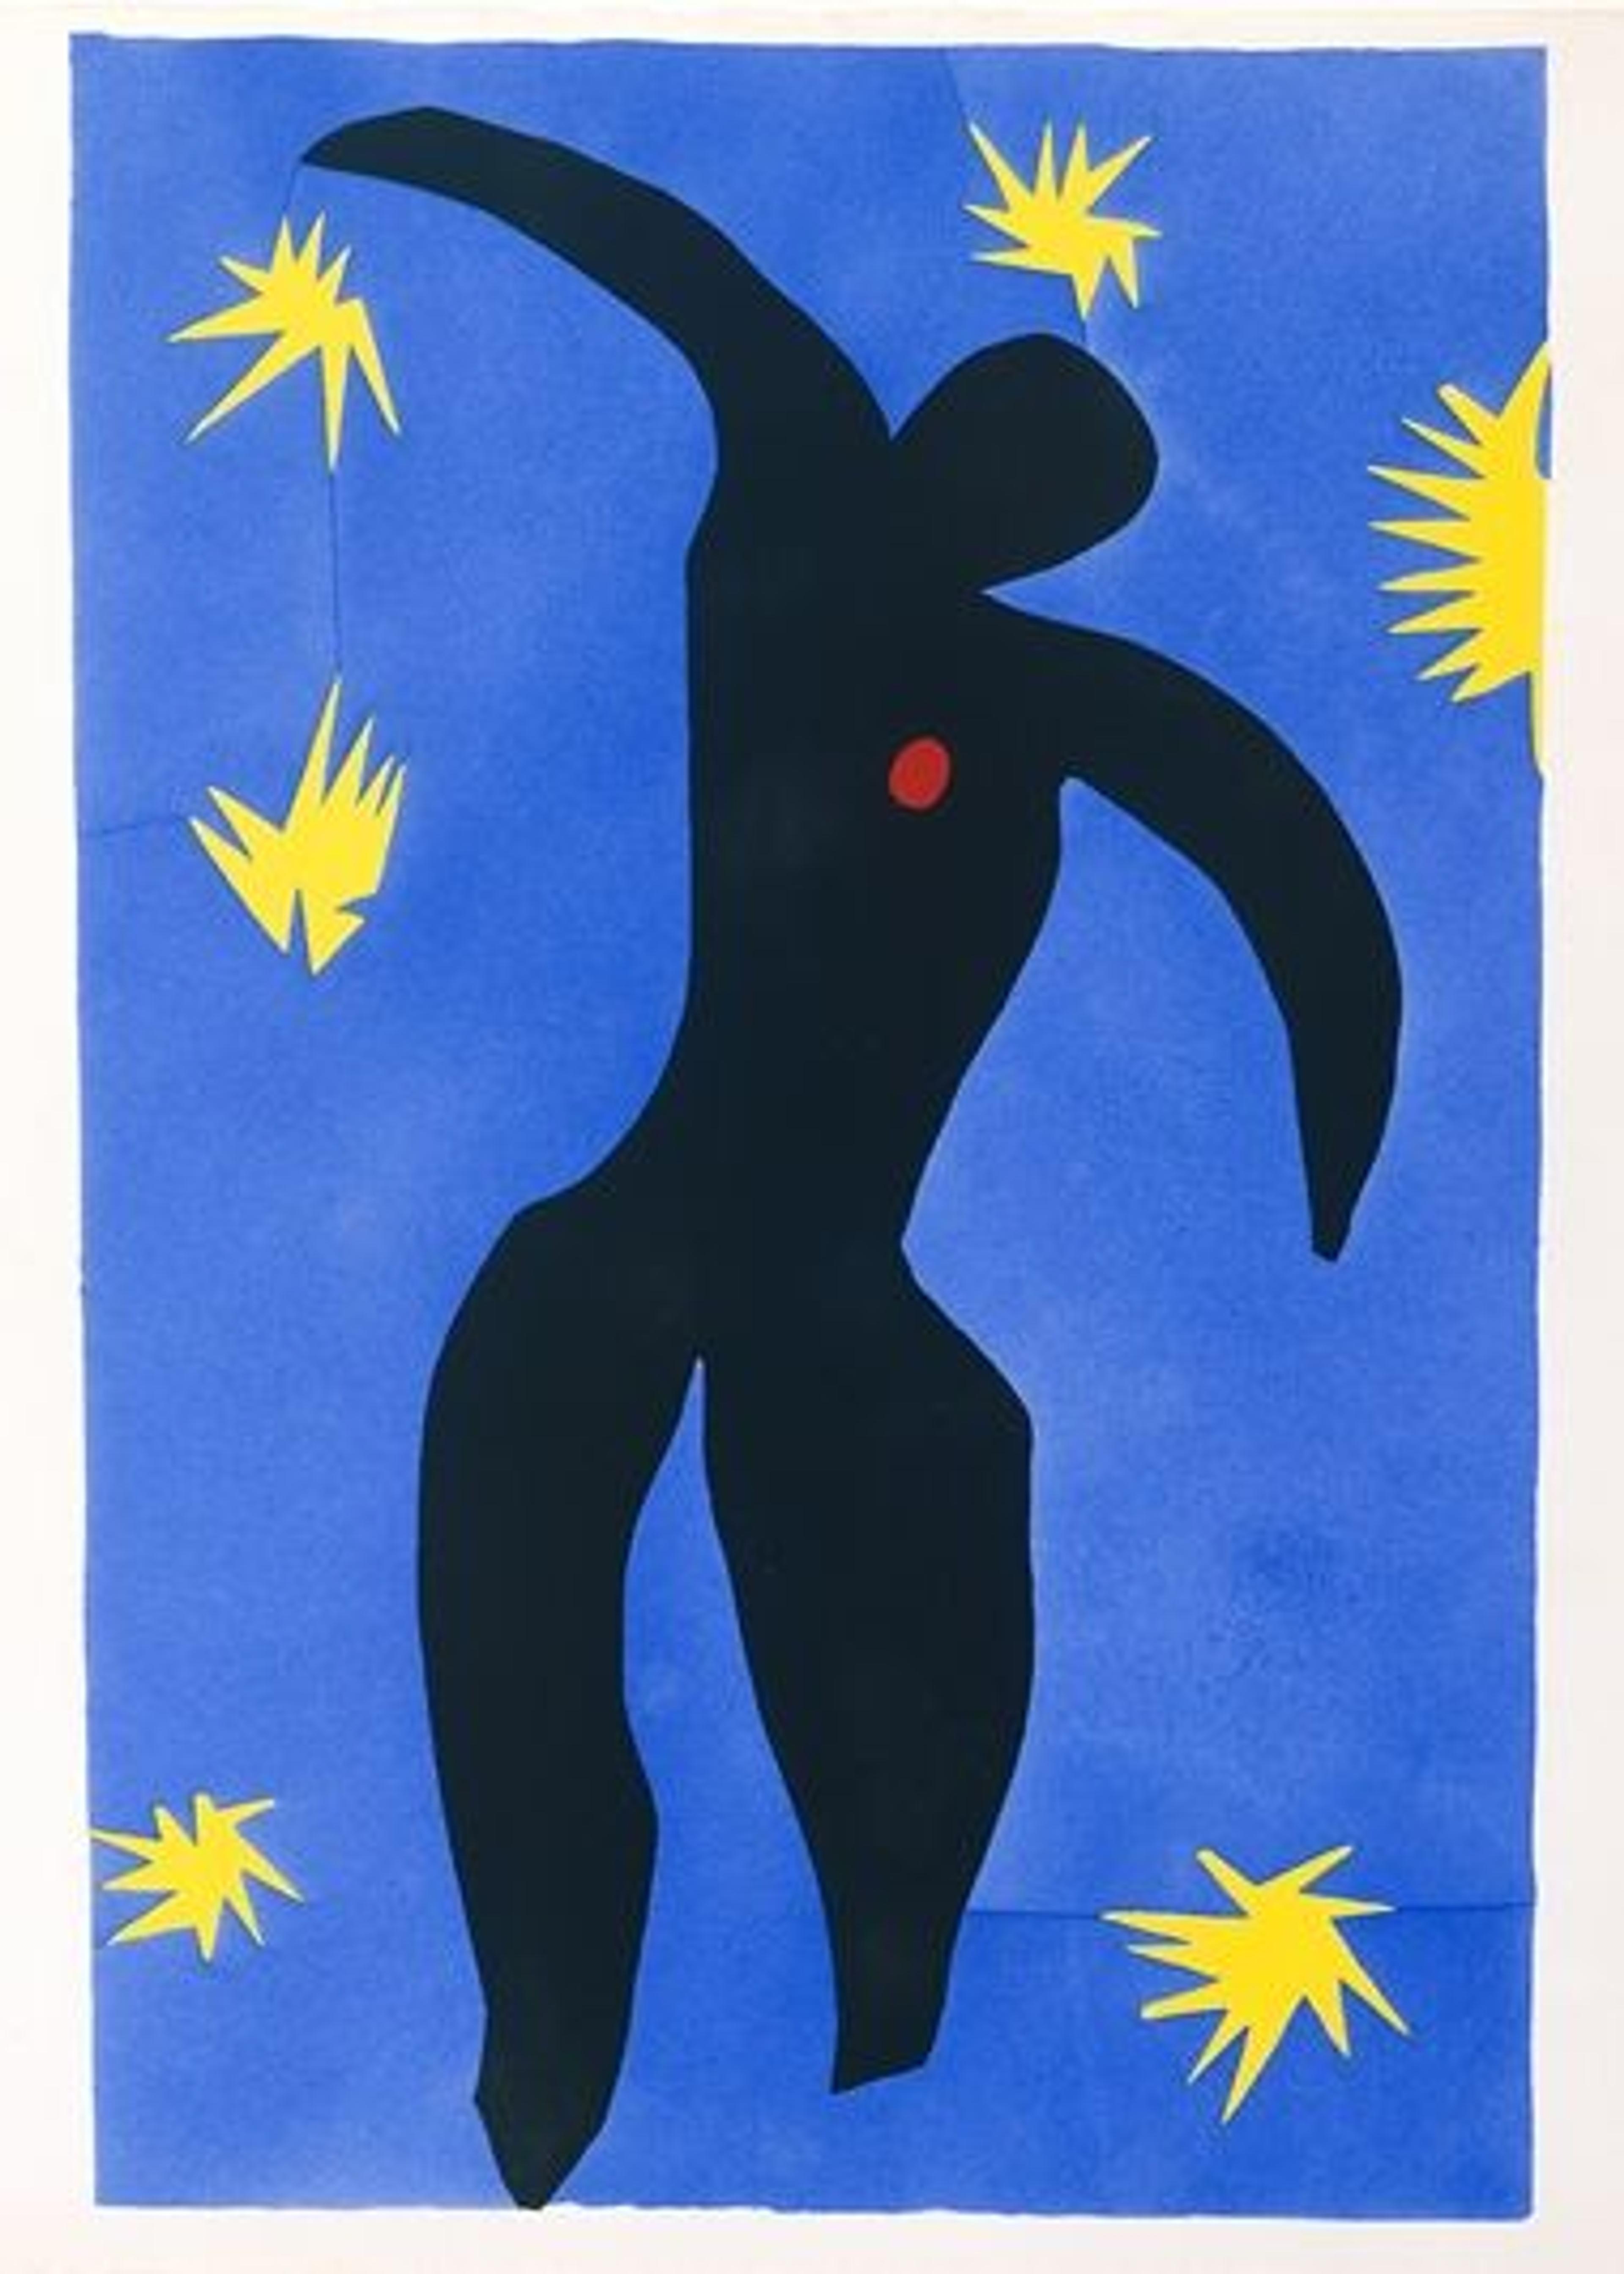 A colorful collage of a figure floating in a blue sky surrounded by stars, with a red dot on its chest